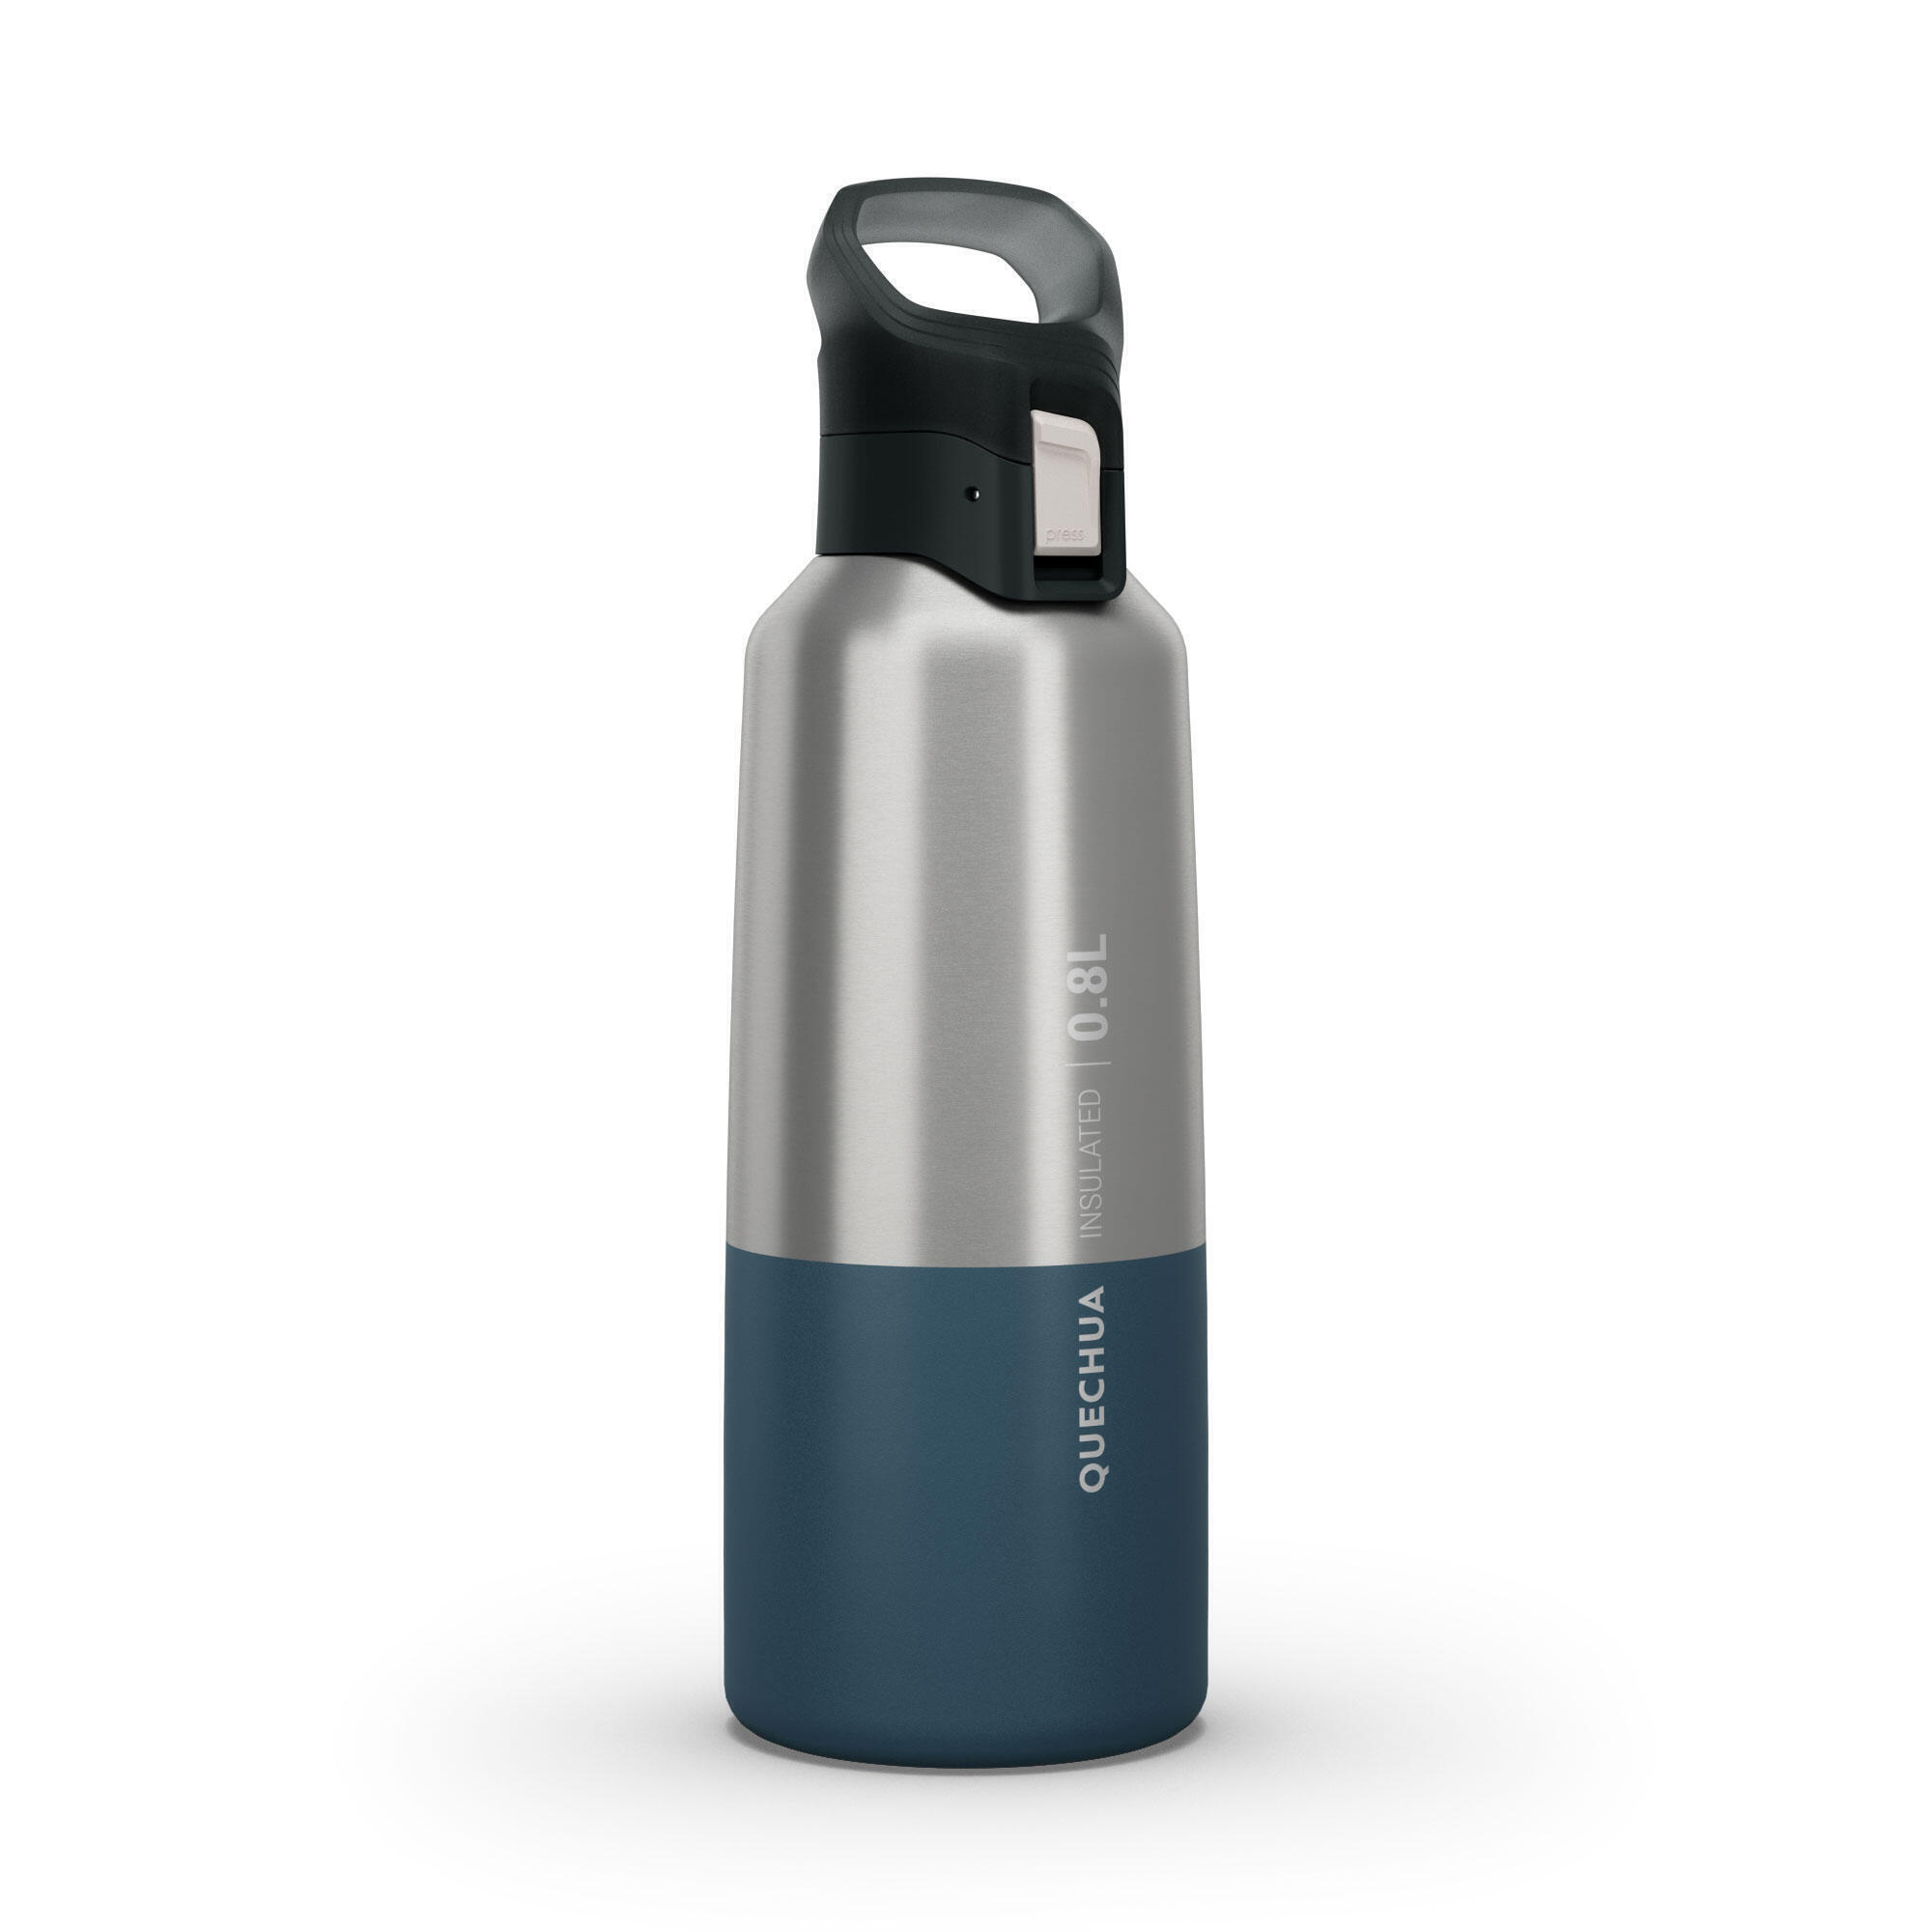 0.8 L stainless steel isothermal water bottle with quick-release cap for hiking  16/31